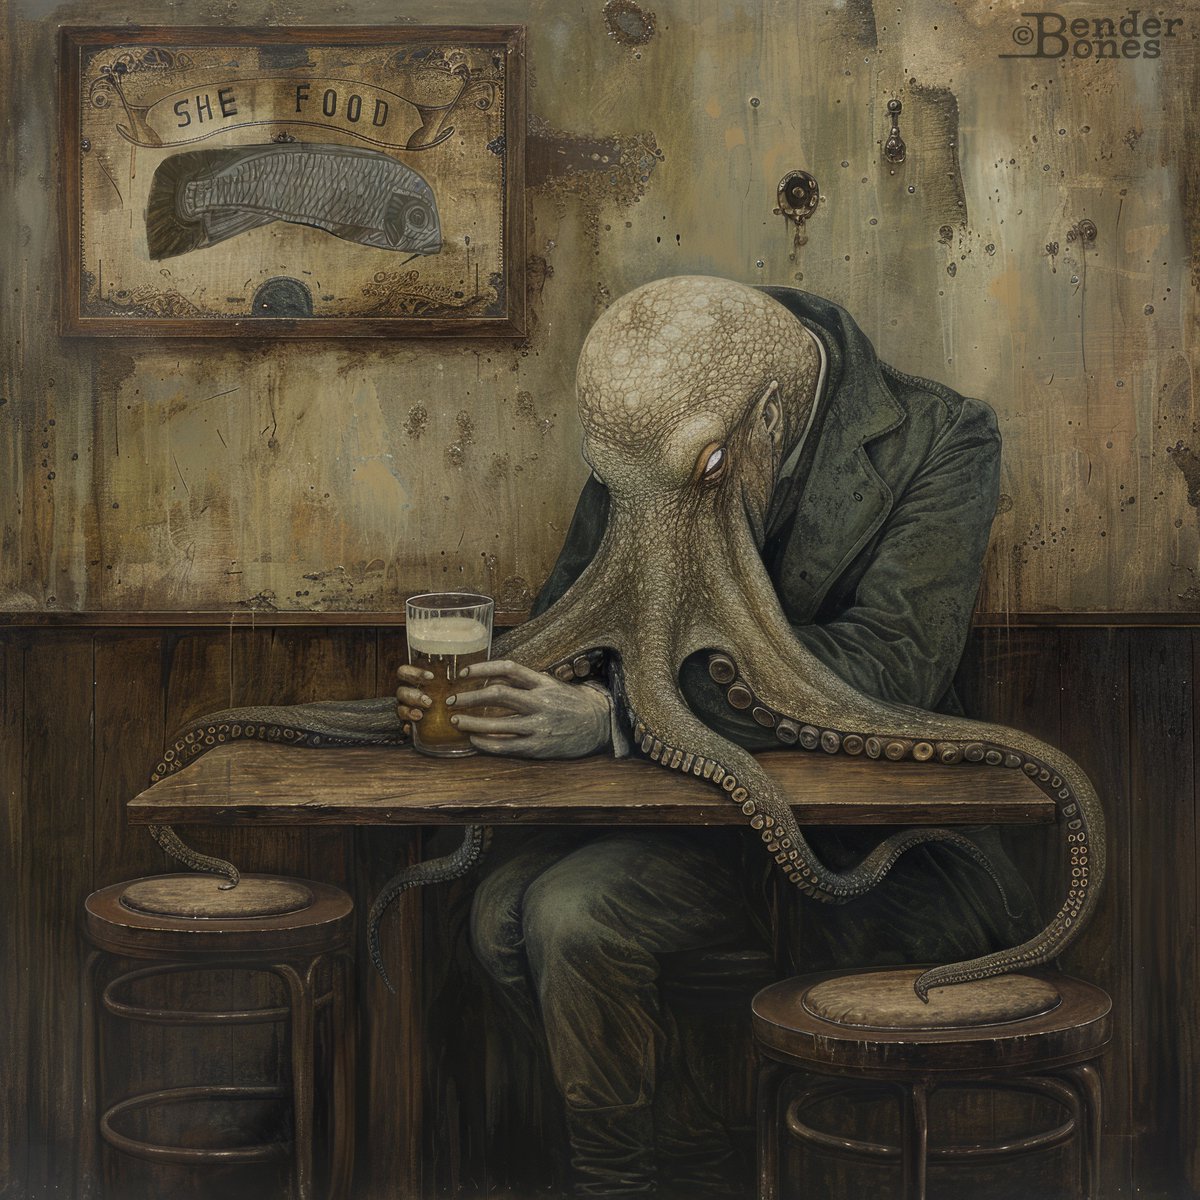 🦑Where everybody knows your name
And they're always glad you came
You wanna be where you can see
Our troubles are all the same
You wanna be where everybody knows your name🎶Gary Portnoy🎨Bender Bones🦑
#Cthulhu #HPLovecraft #Lovecraftian #Monster #HorrorArt #Horror #Scifi